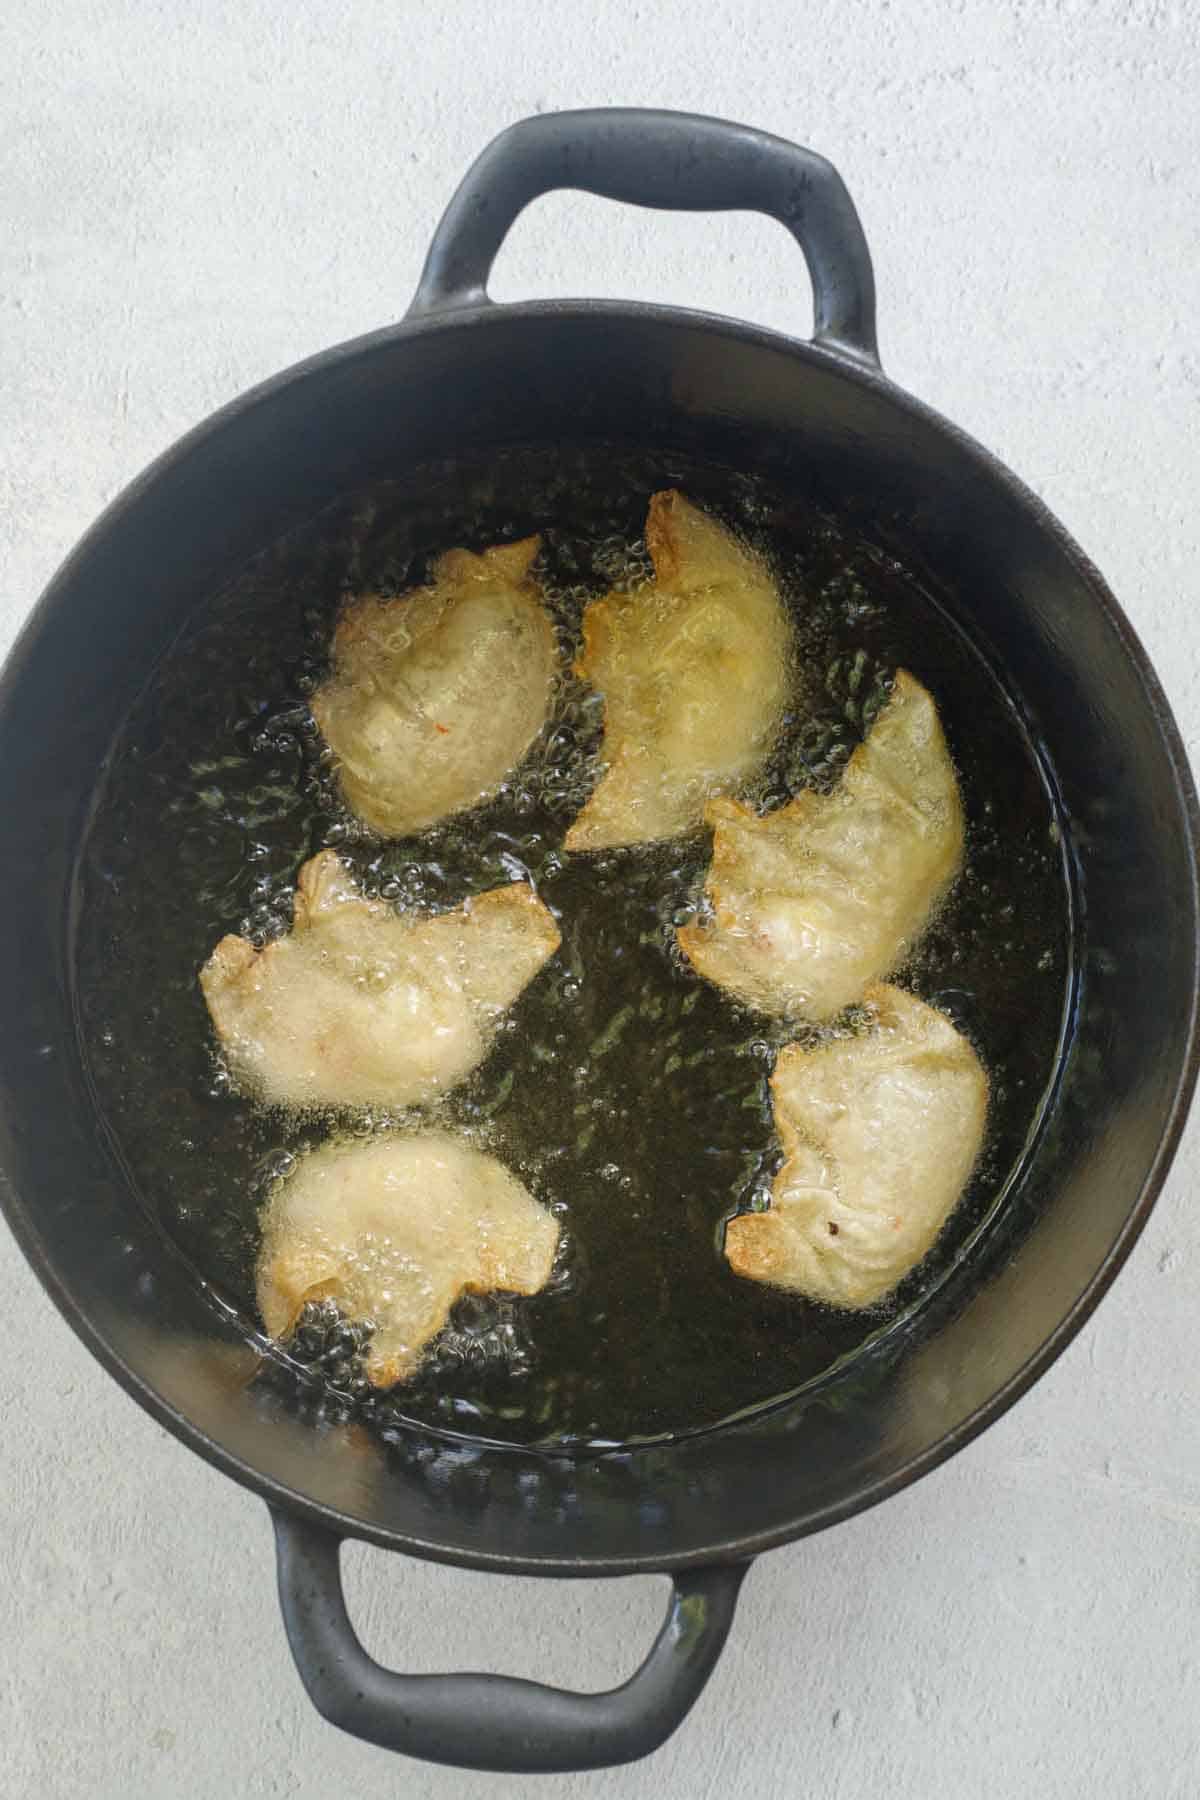 The wontons frying in the pot.